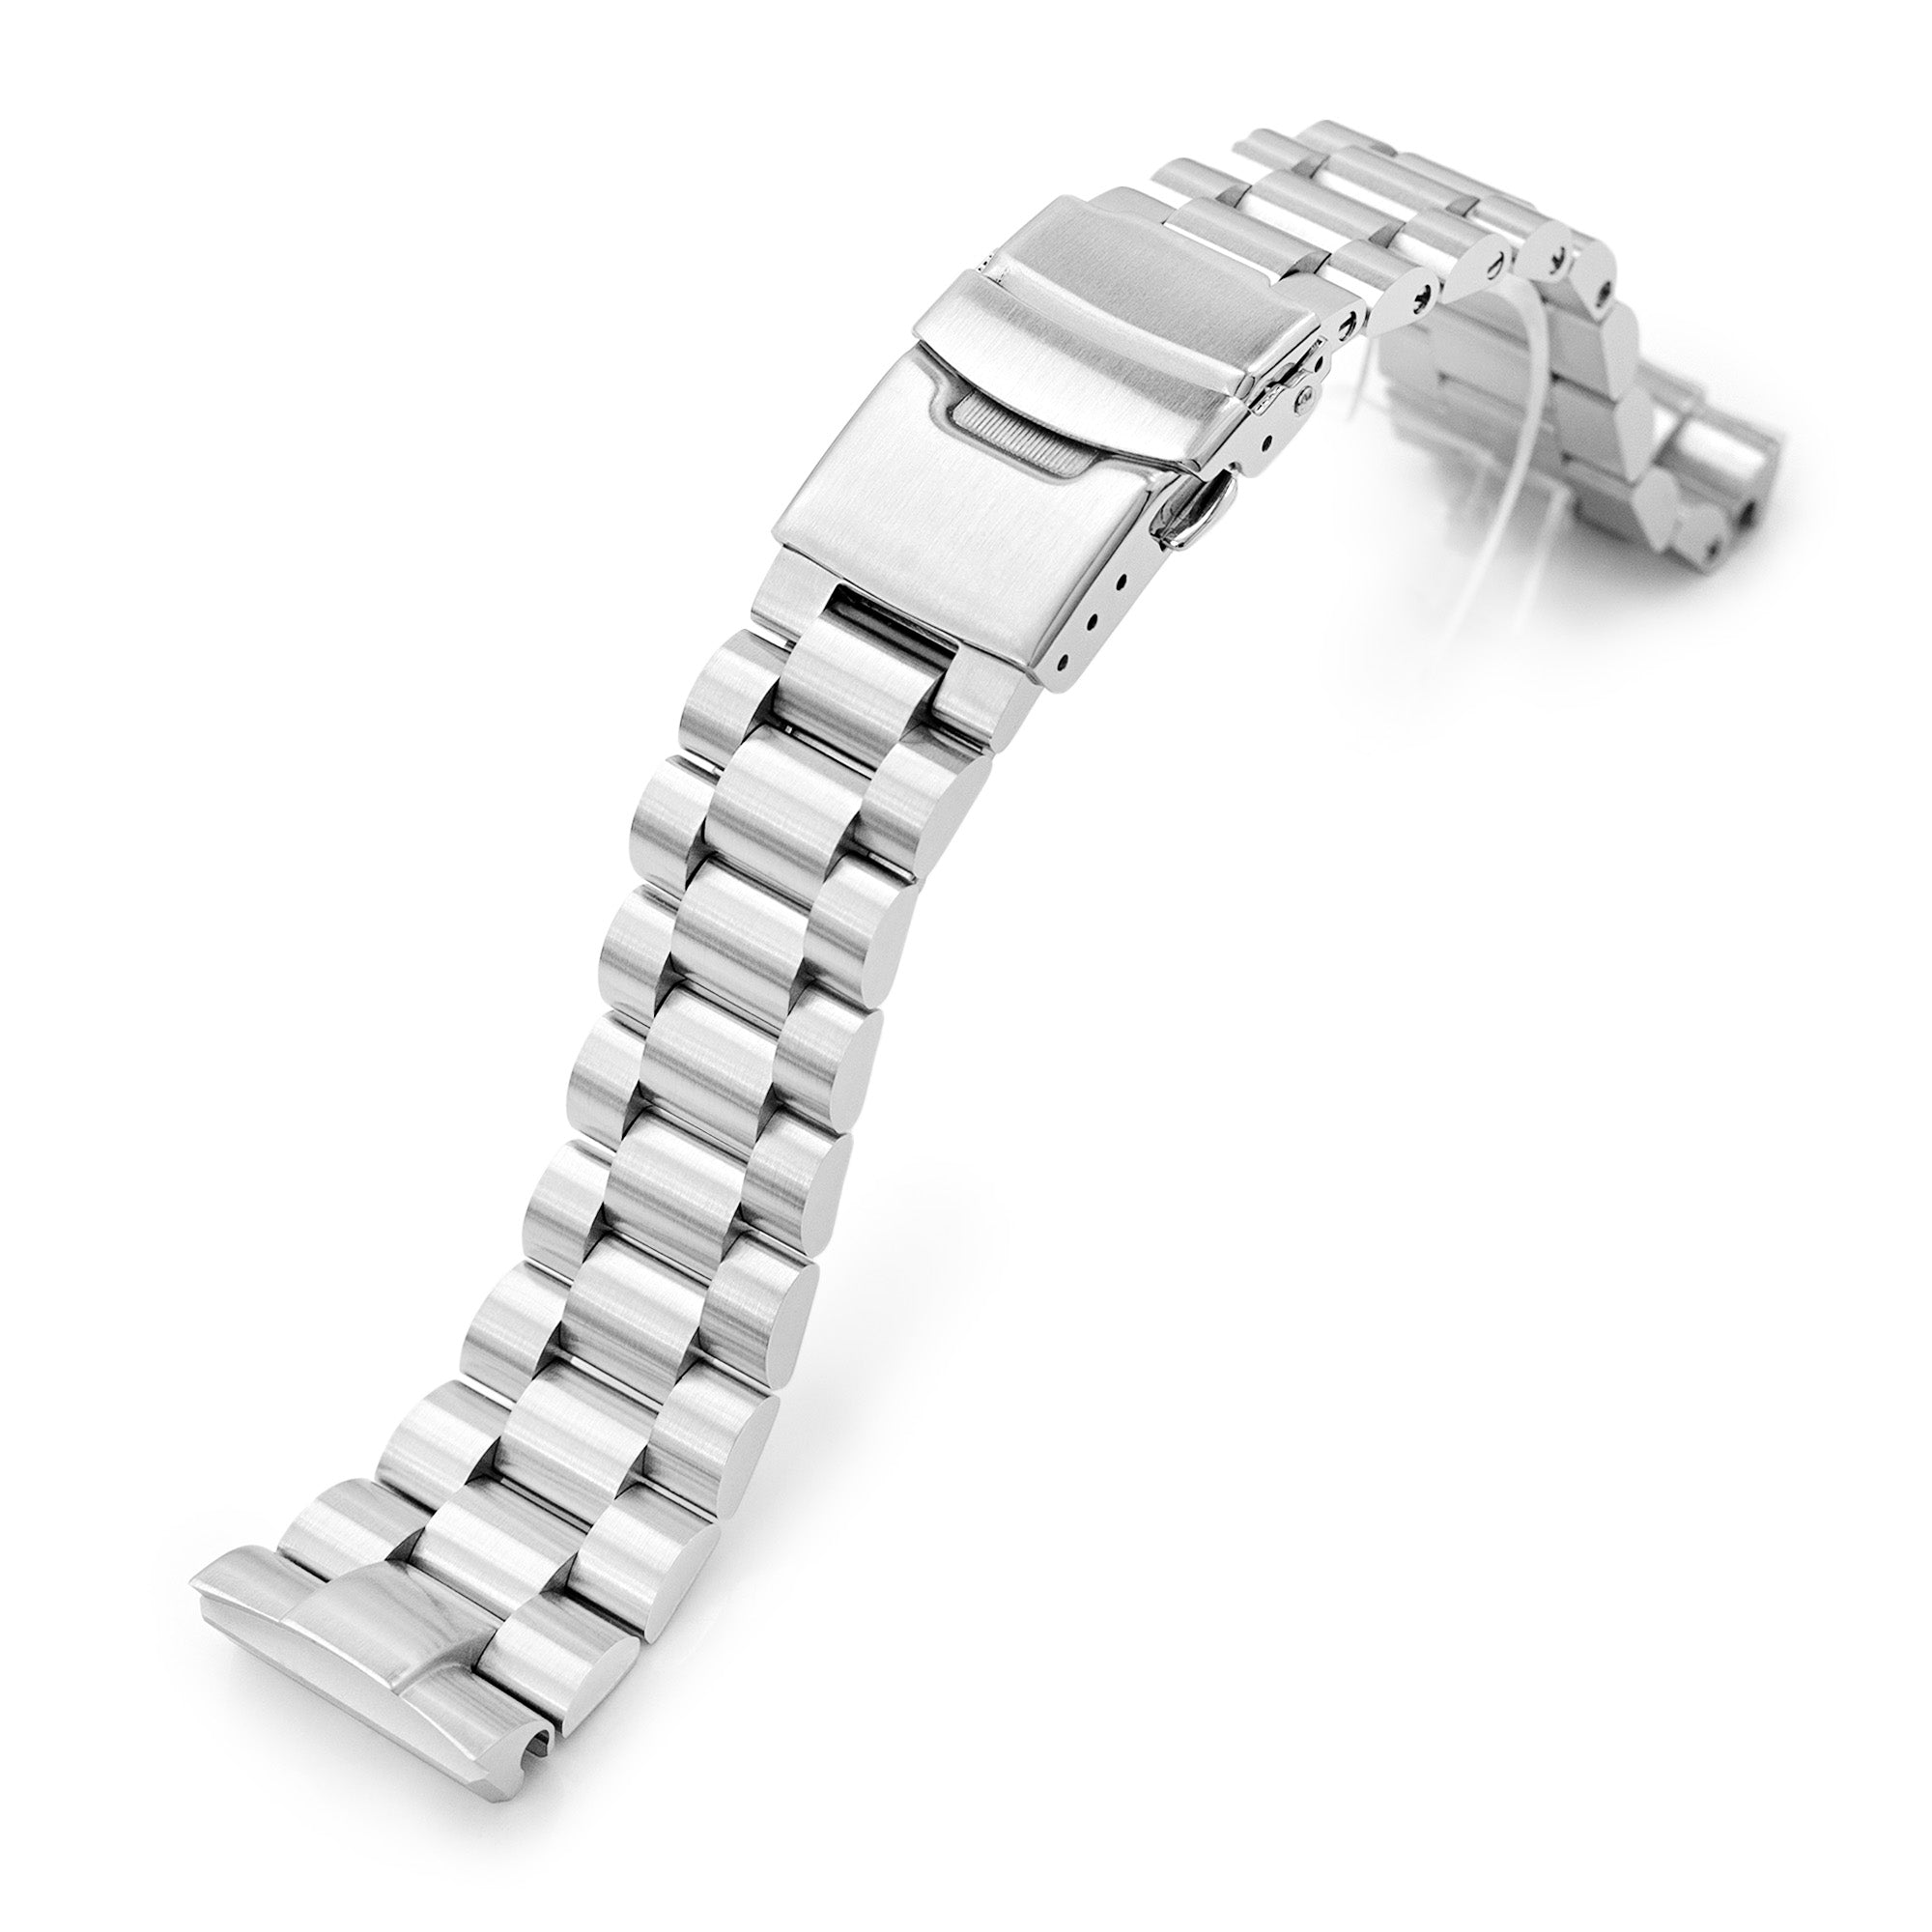 22mm Endmill Watch Band compatible with Seiko New Turtles SRP777 and PADI SRPA21, Diver Clasp Brushed